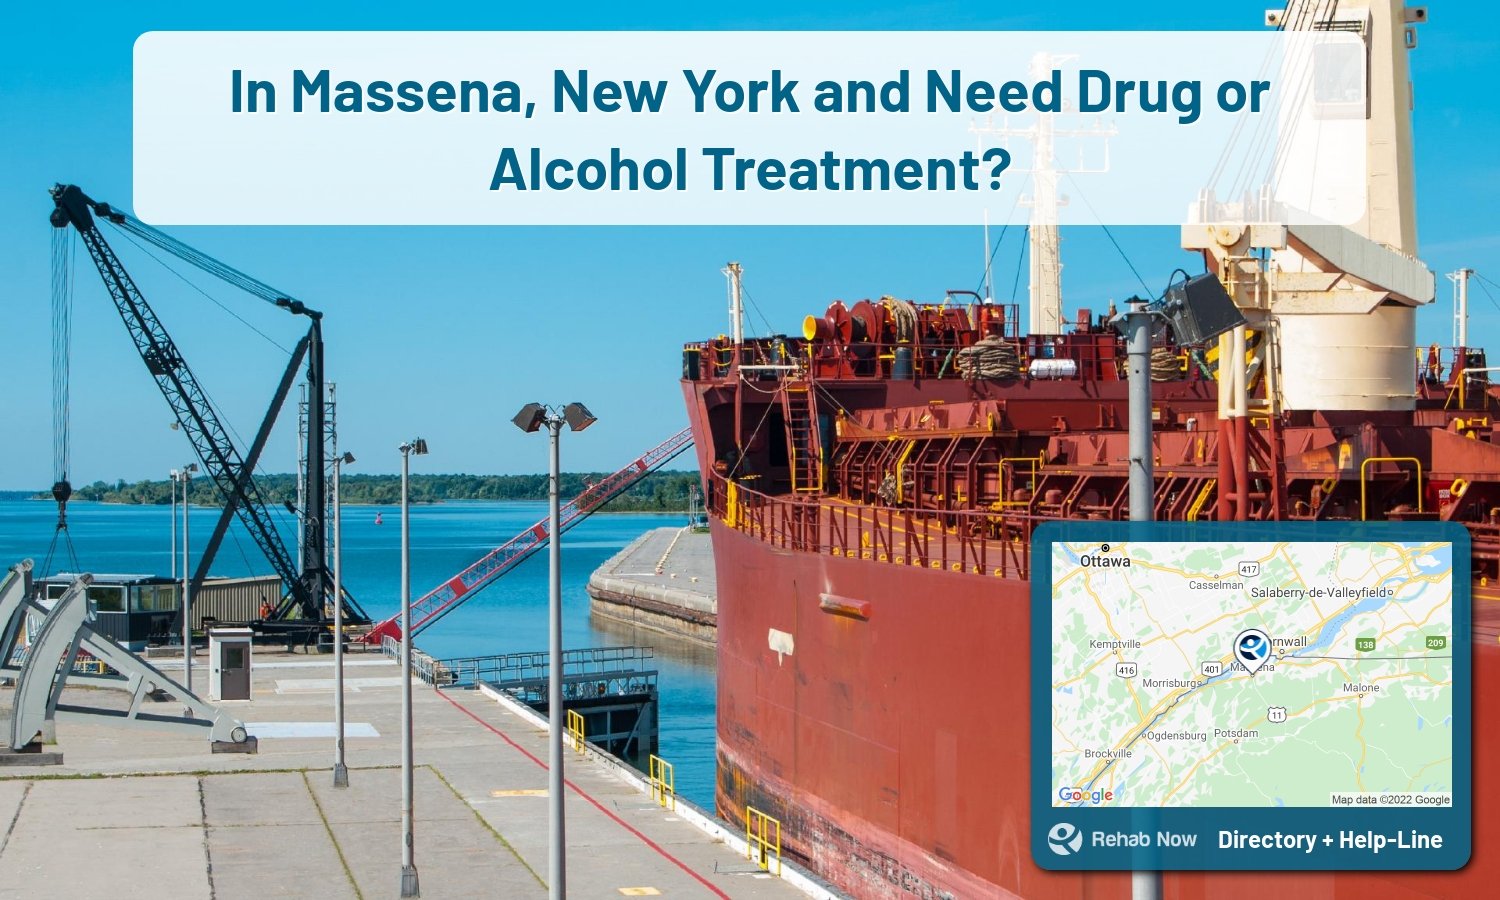 Let our expert counselors help find the best addiction treatment in Massena, New York for you or a loved one now with a free call to our hotline.